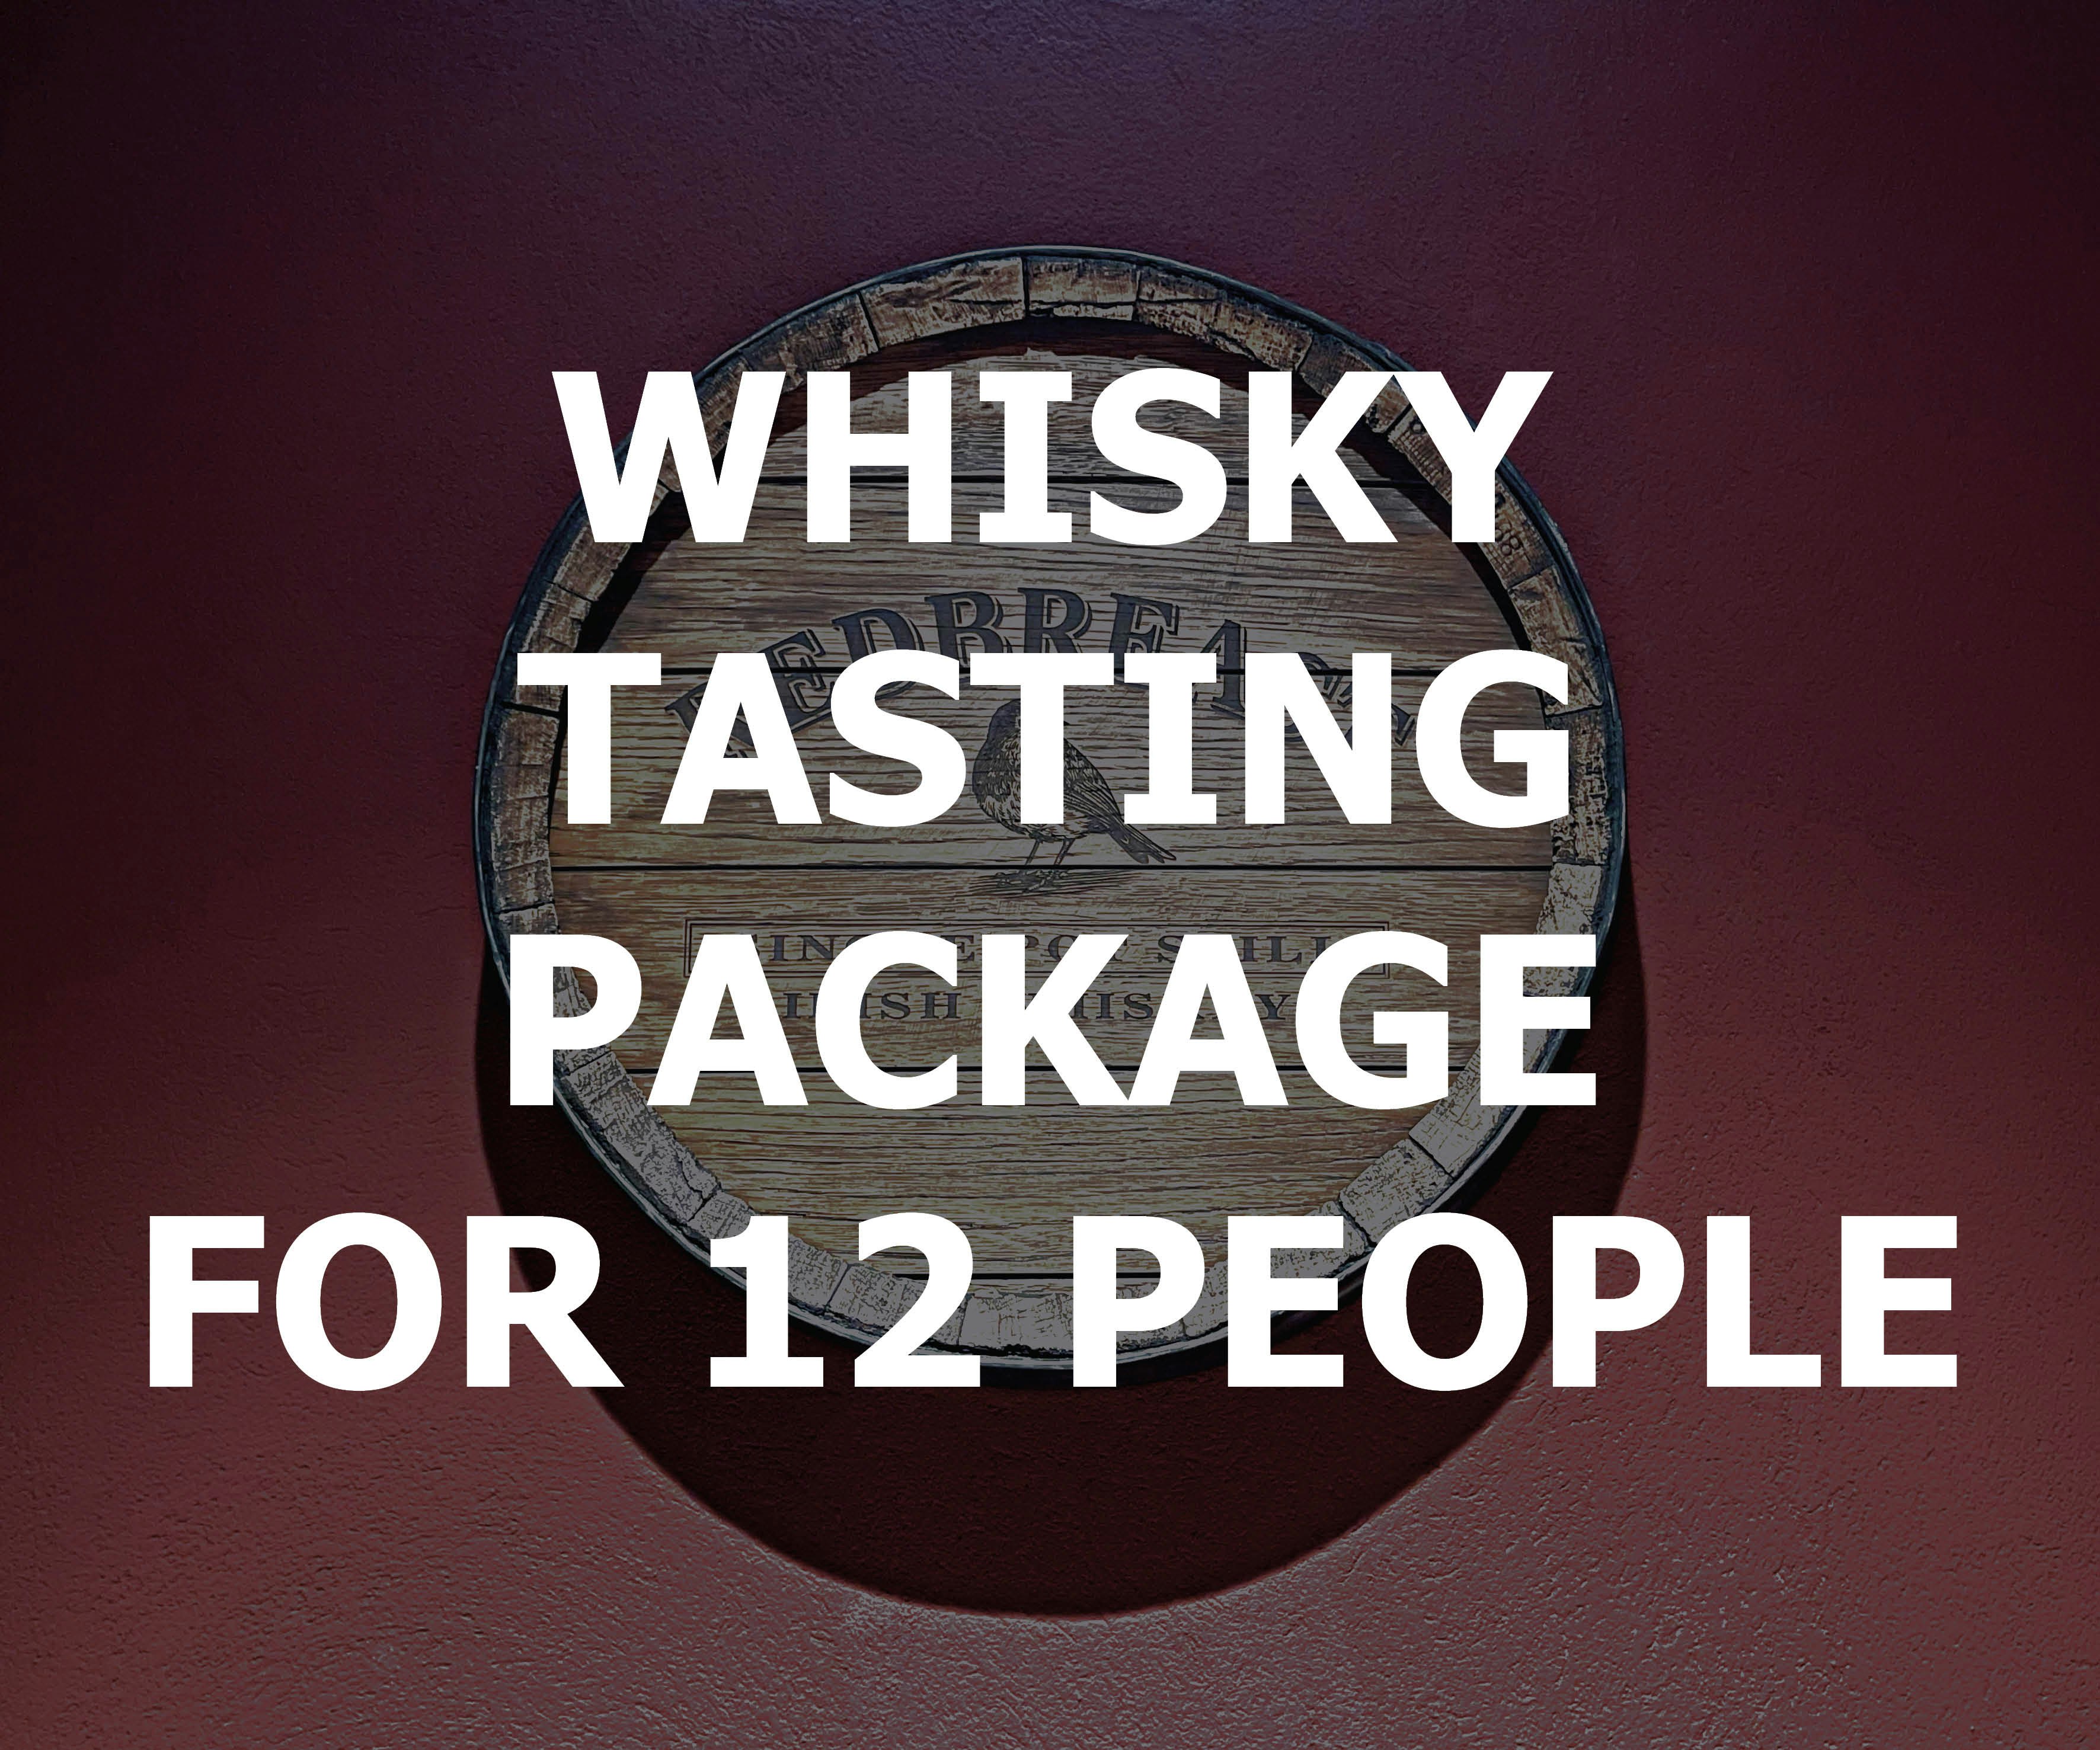 Whiskey from A-Z (theory & tasting) package for 12 people